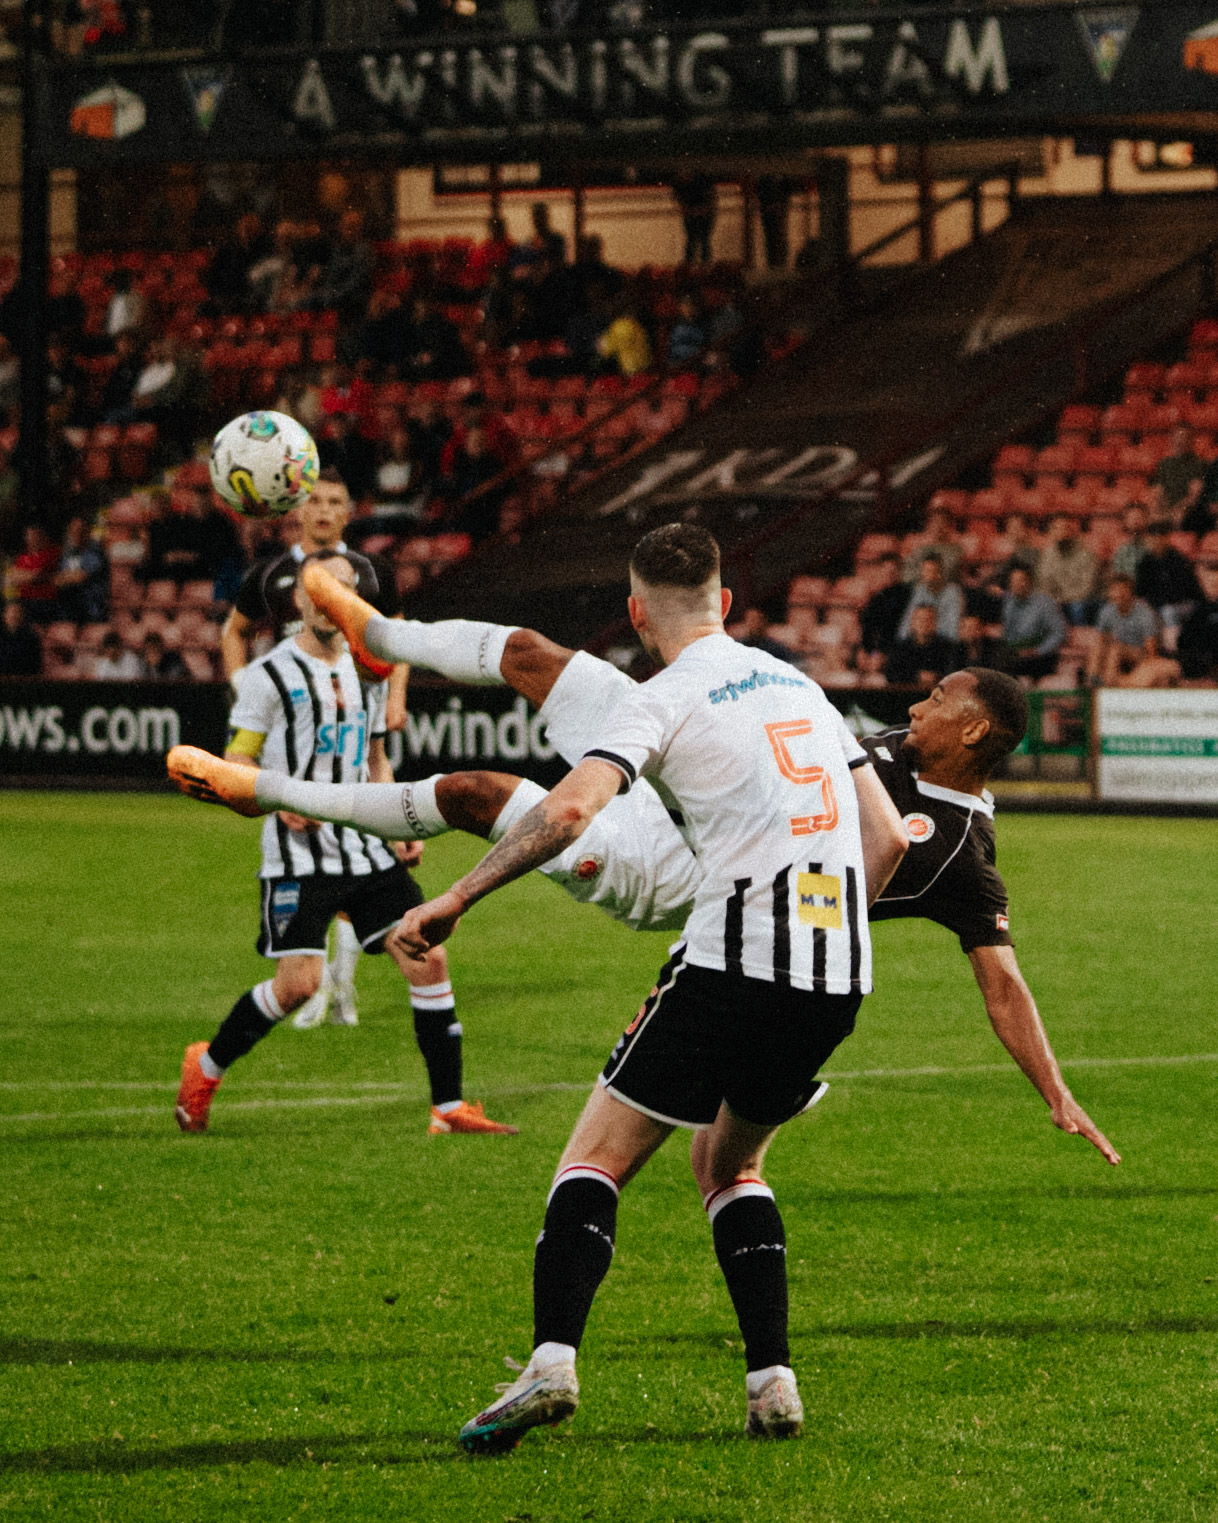 Etienne Amenyido's horizontal bicycle kick in the friendly against Dunfermline.